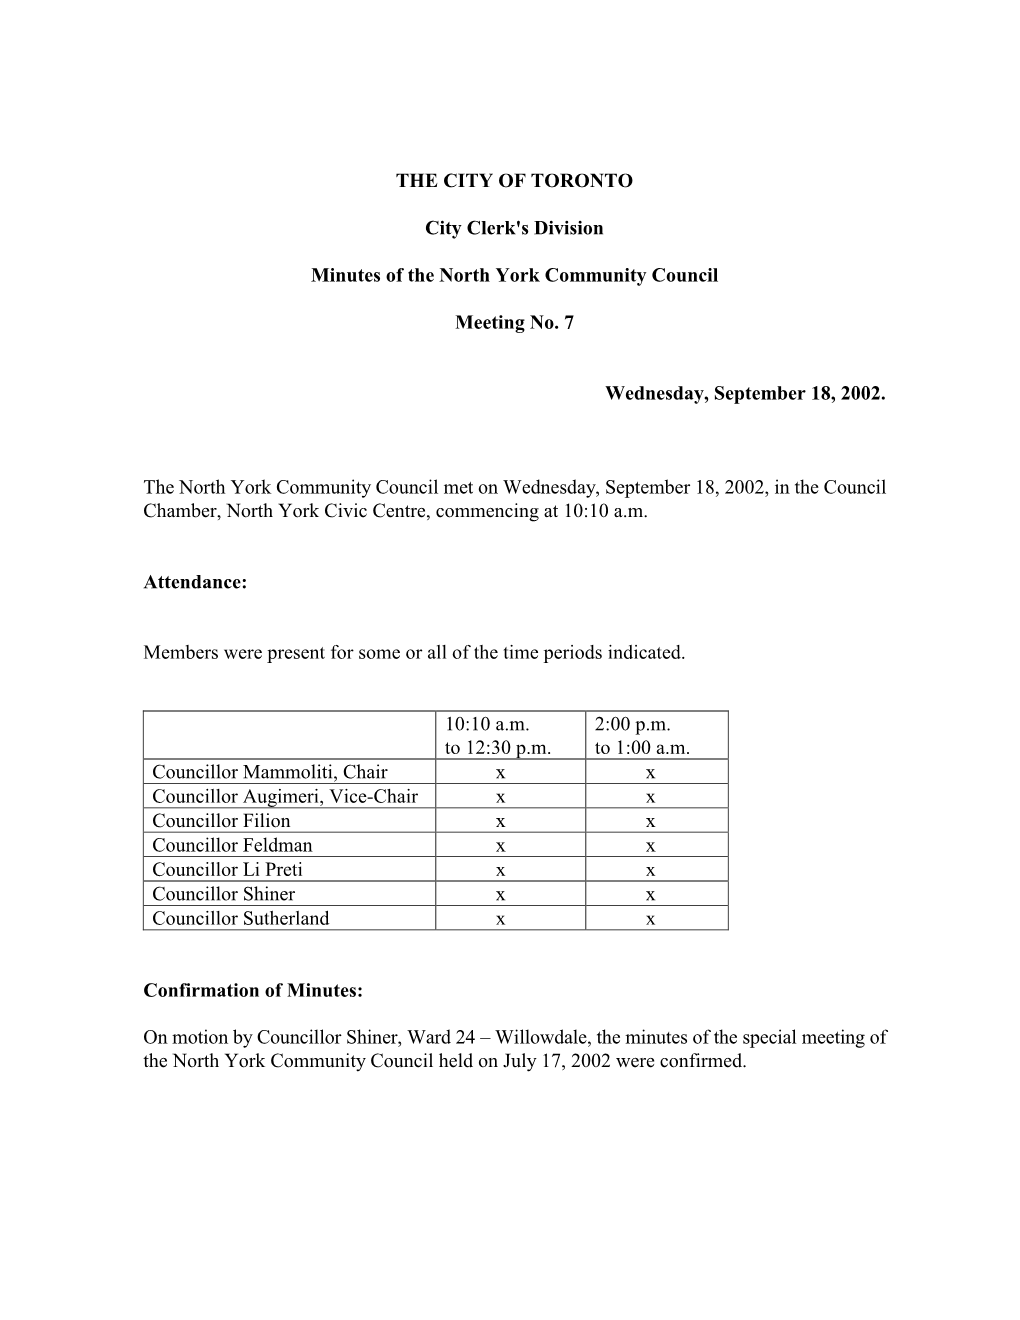 Minutes of the North York Community Council